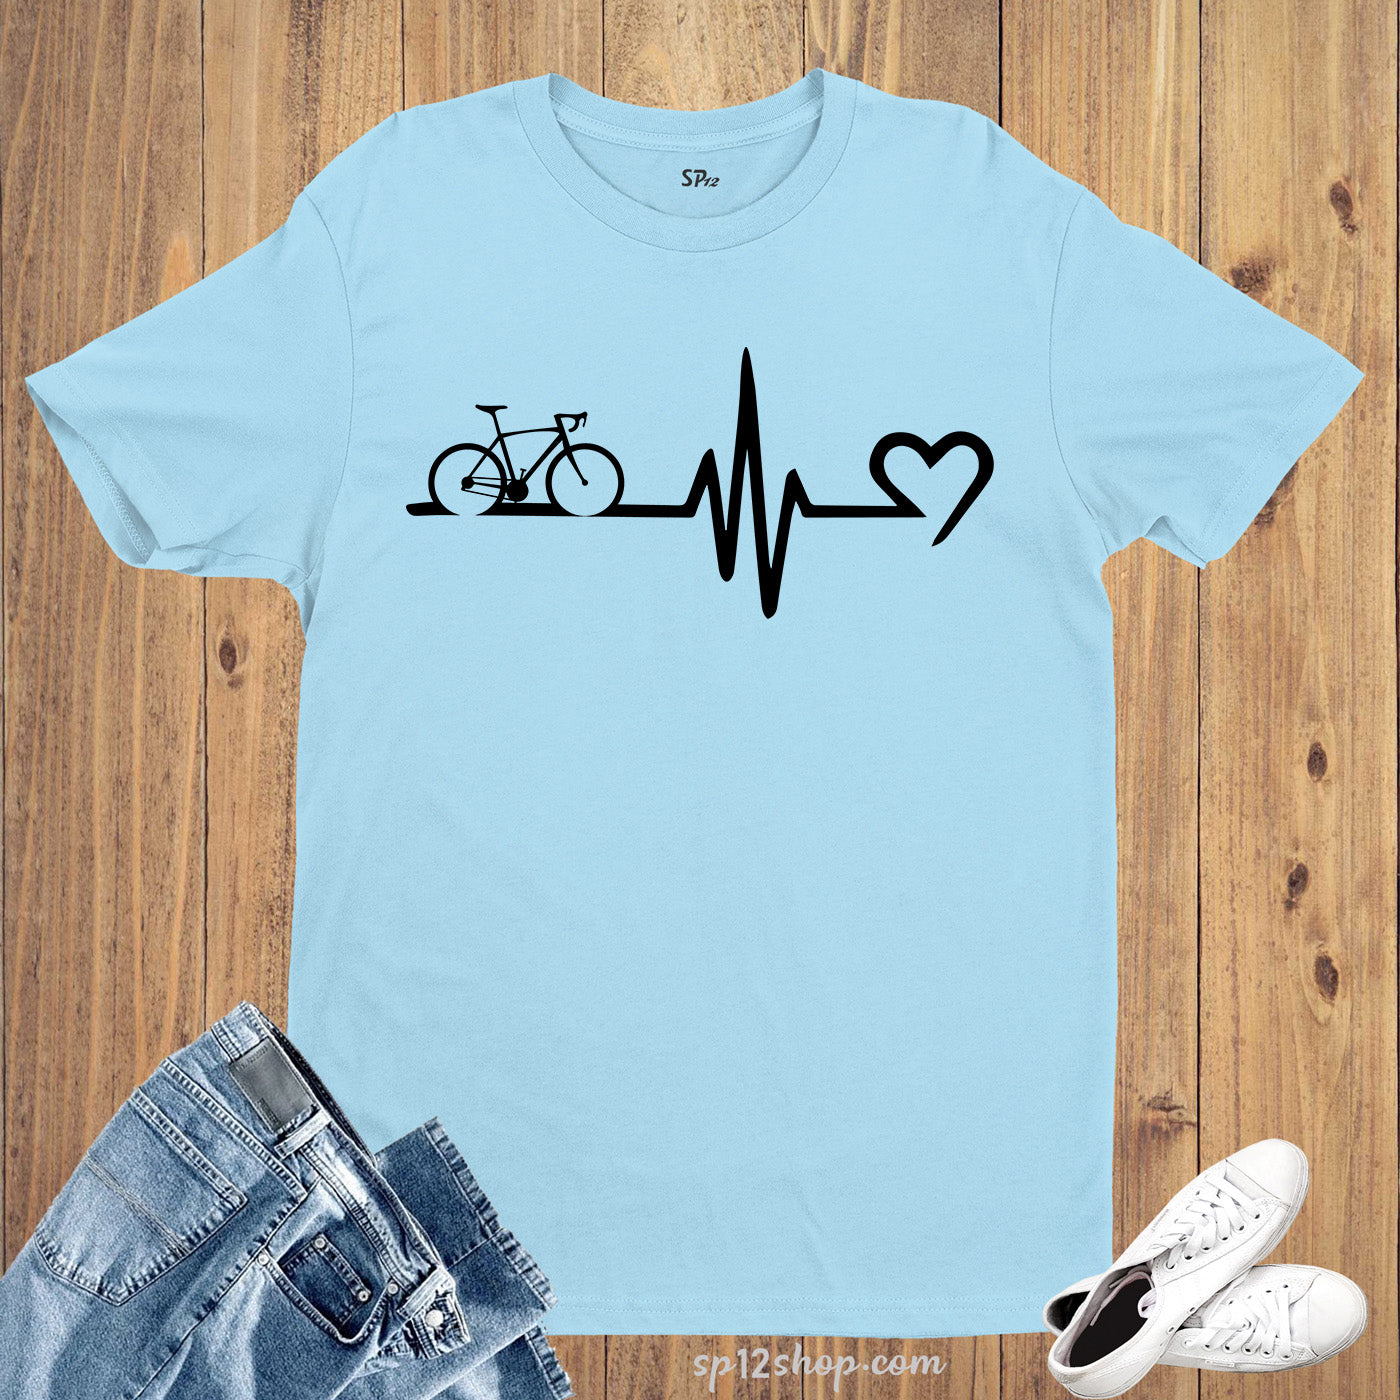 Cycling Cardio T Shirt Bicycle Crossfit Gift Tees